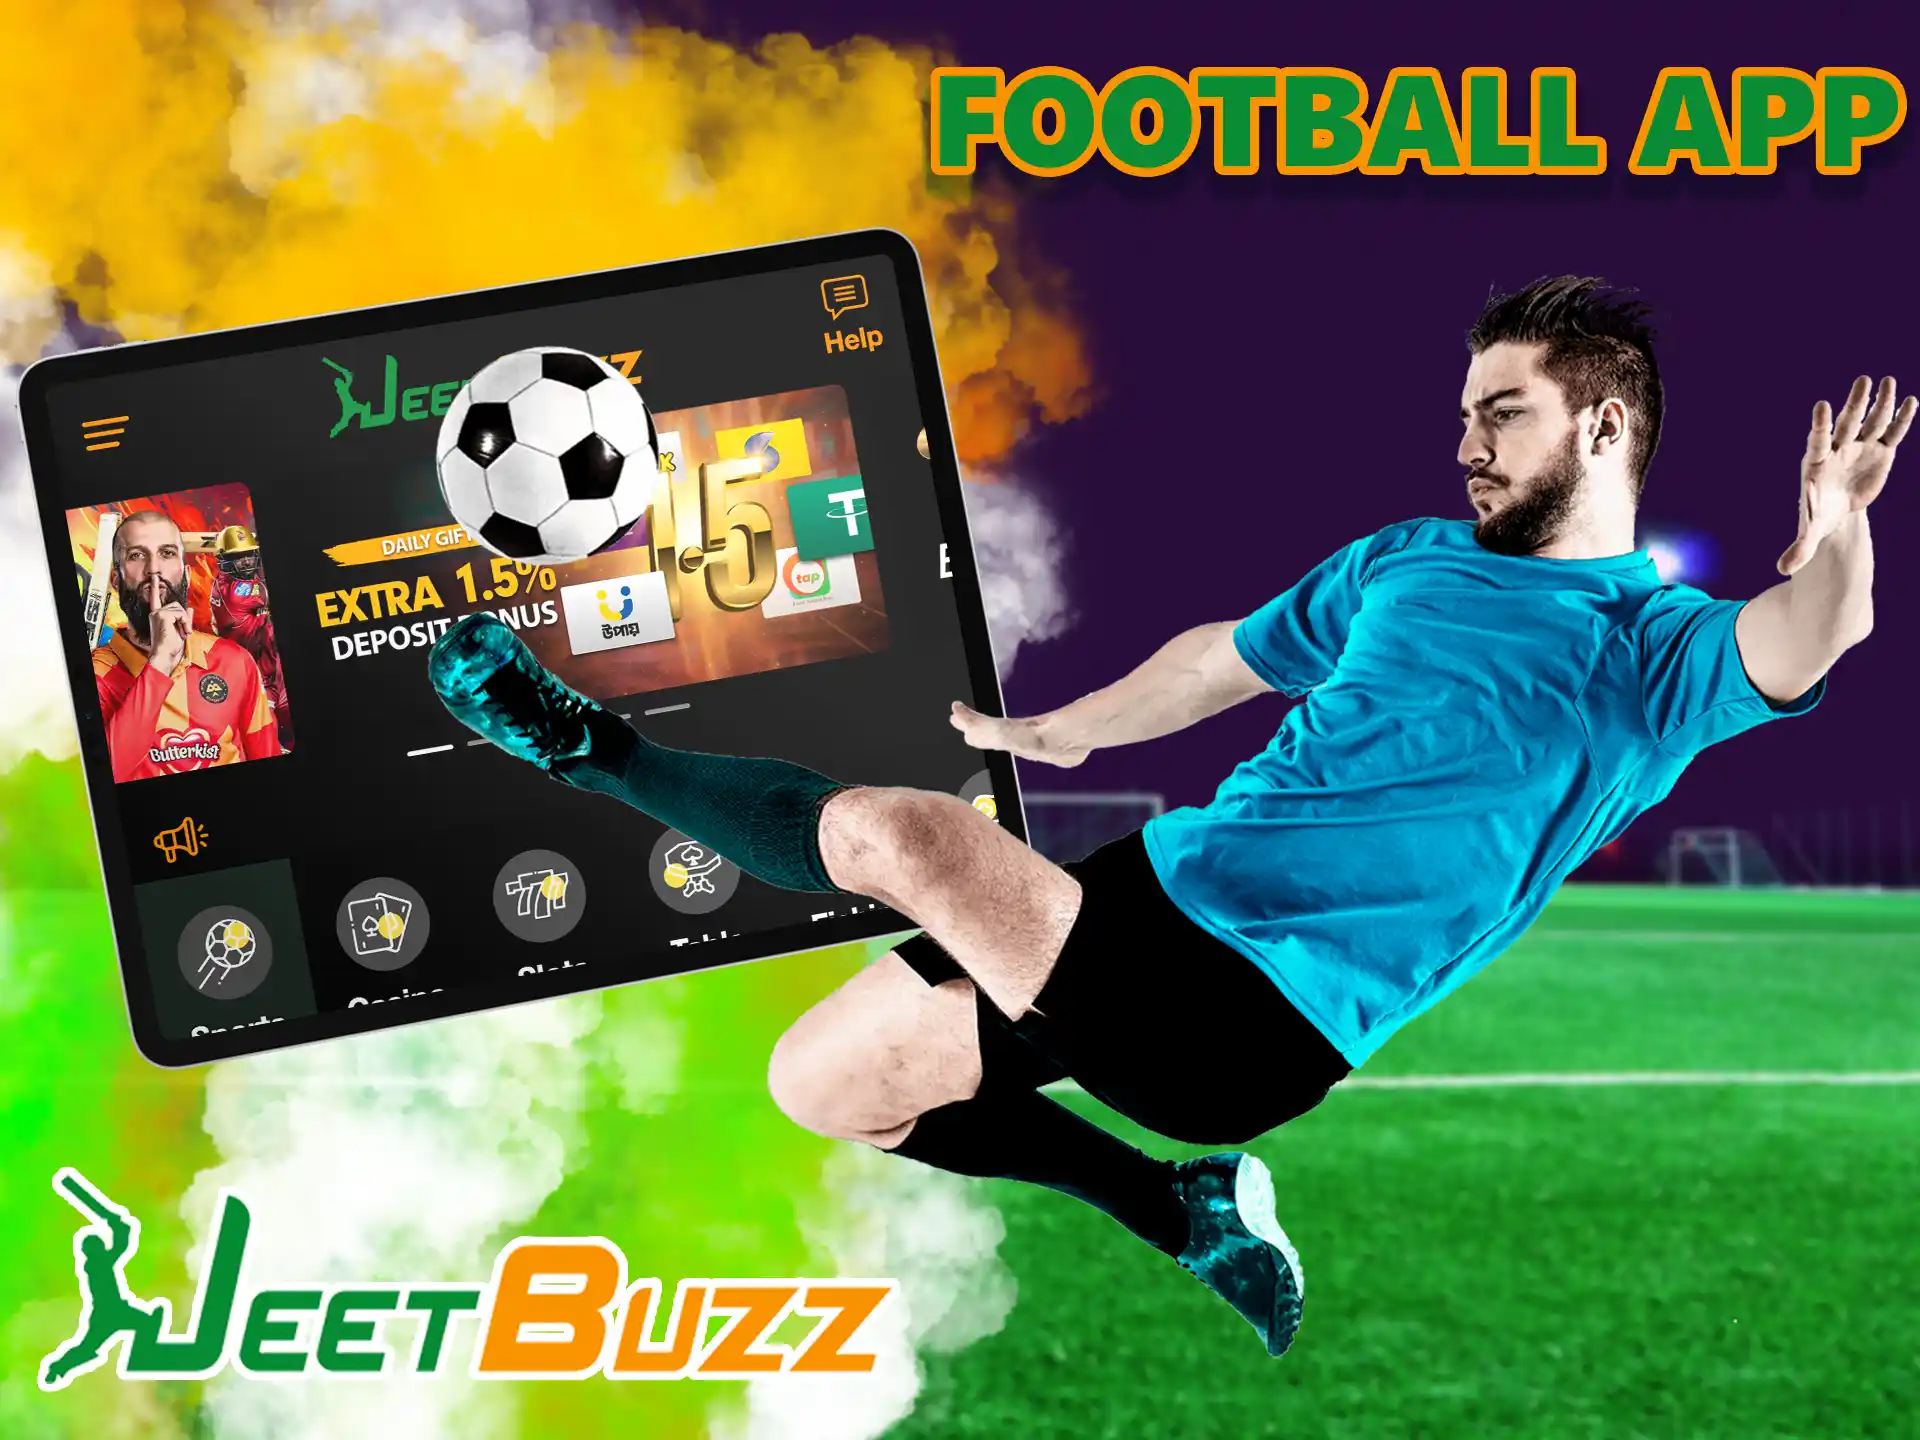 Try your hand at the world's most energetic sport and bet on the best matches online on the JeetBuzz app.